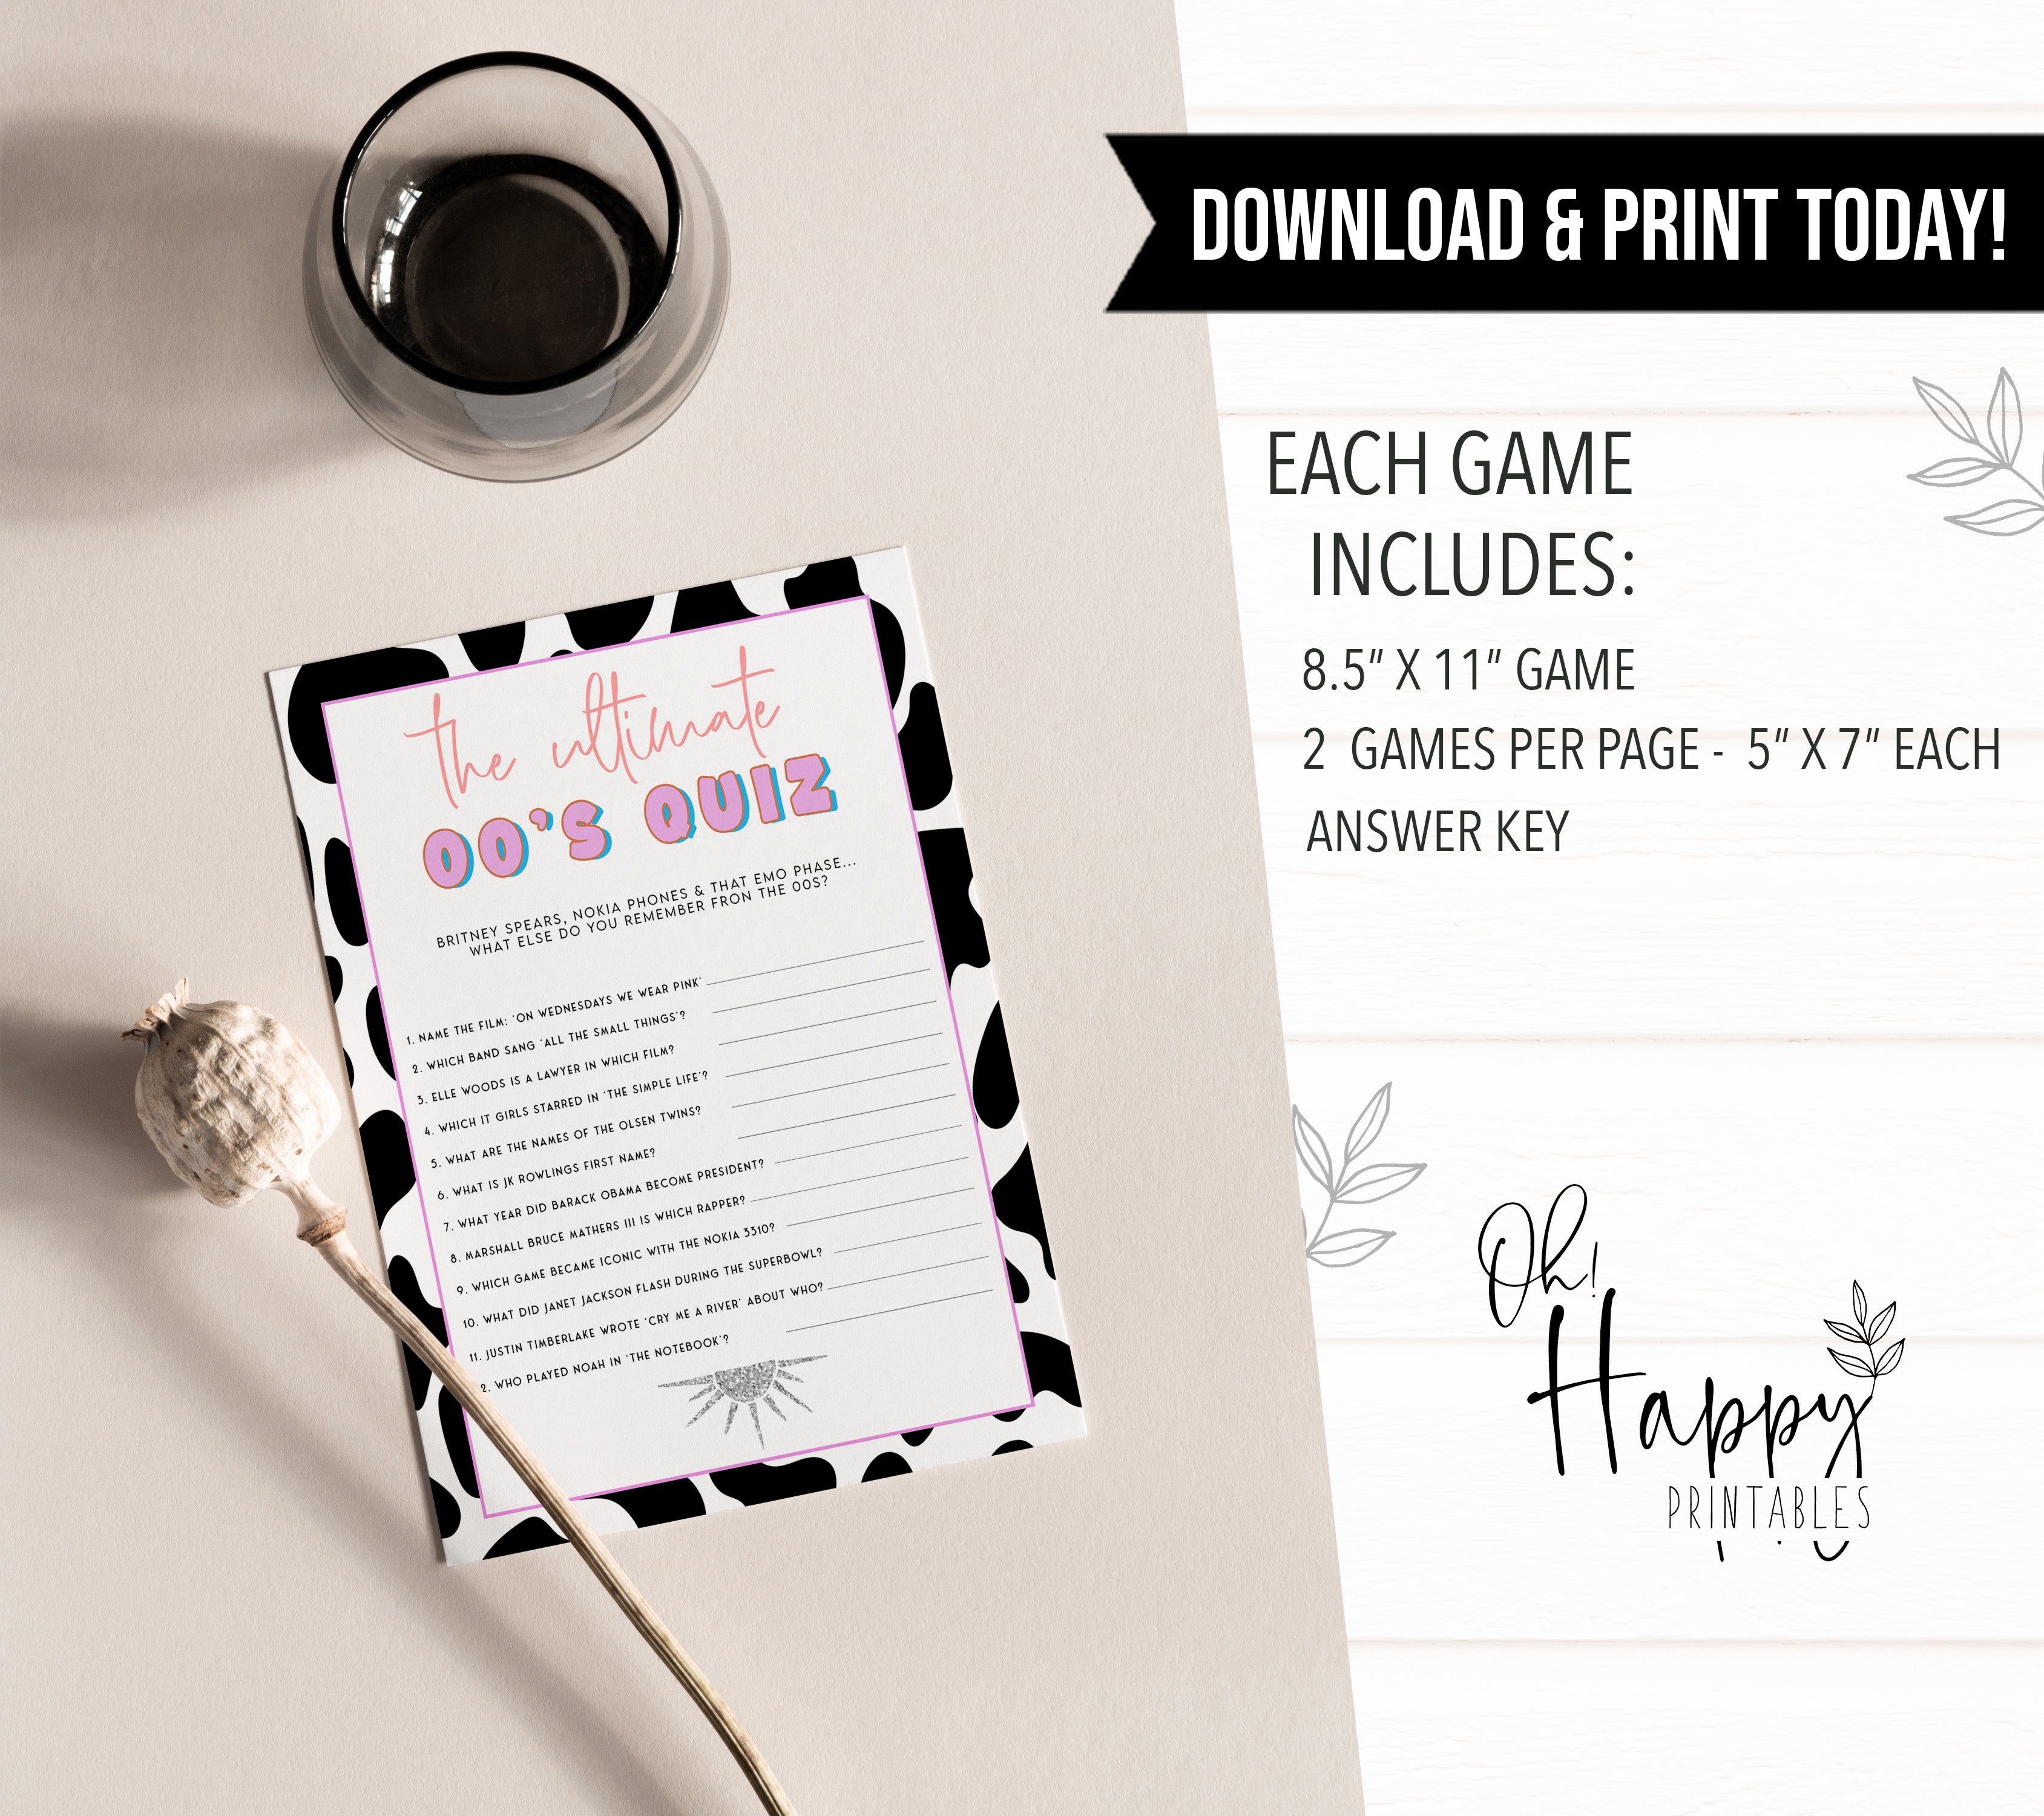 ultimate 00s quiz game, Space cowgirl bachelorette party games, printable bachelorette party games, dirty hen party games, adult party games, disco bachelorette games